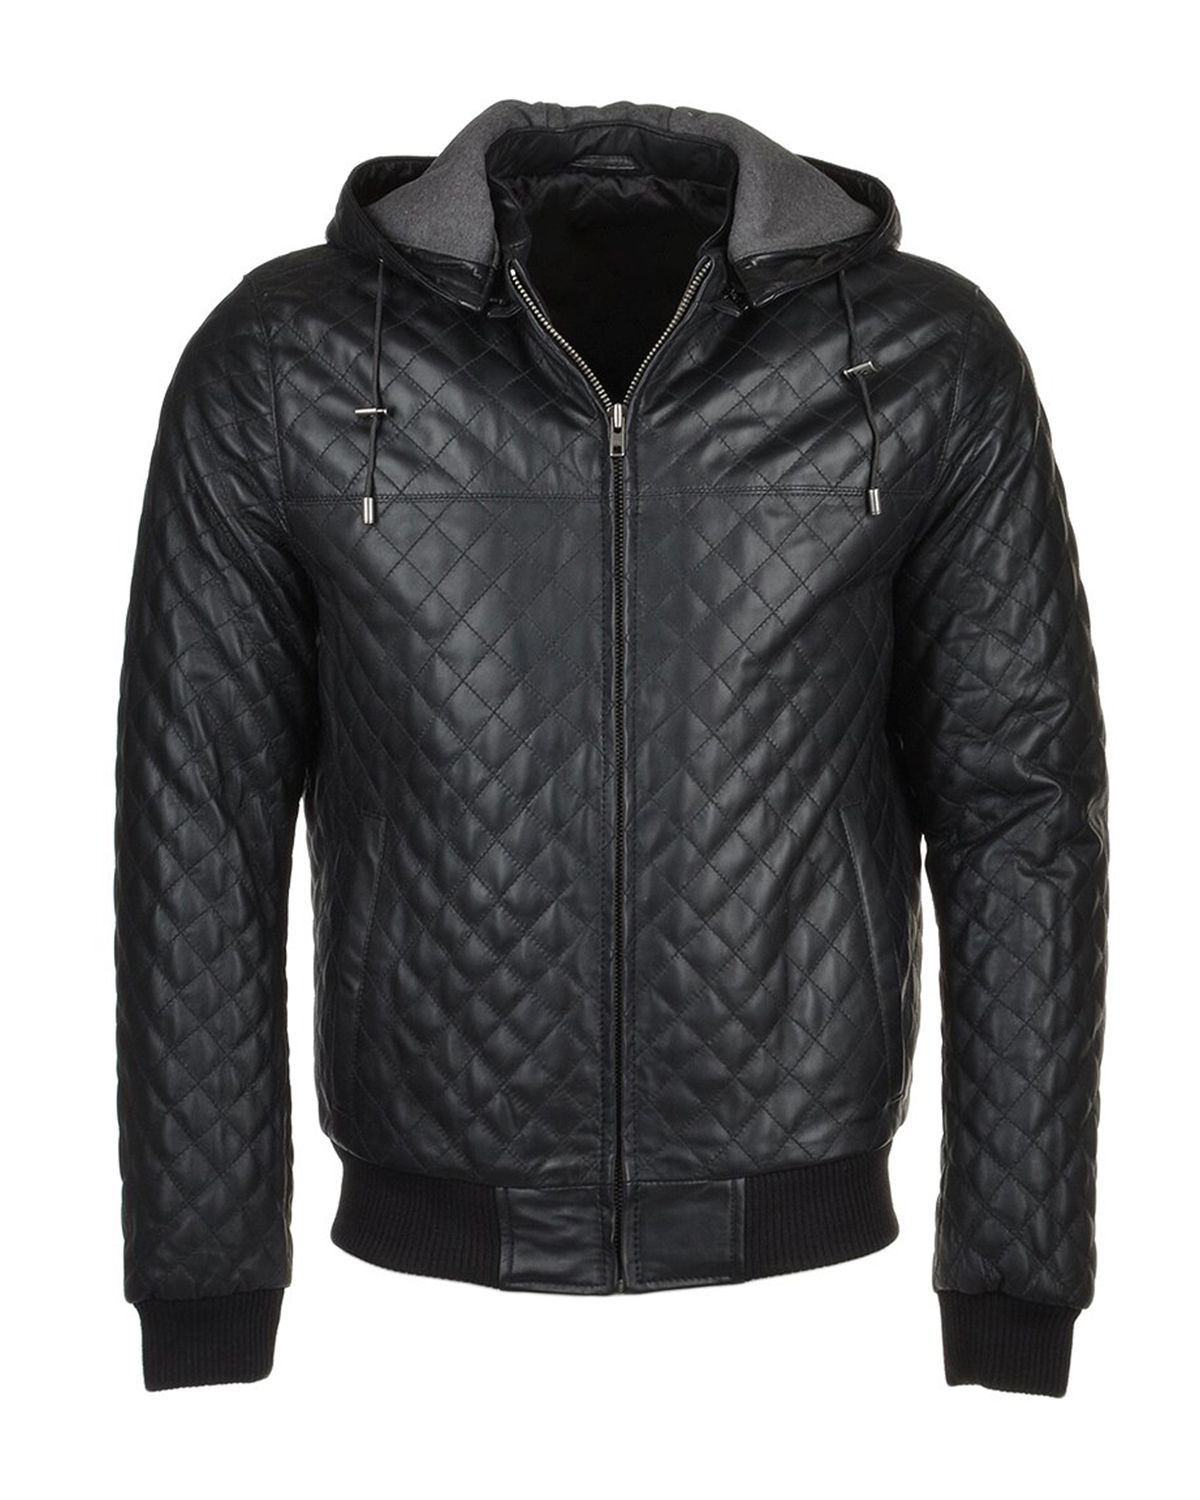 Black and Brown Quilted Leather Jacket | Elite Jacket